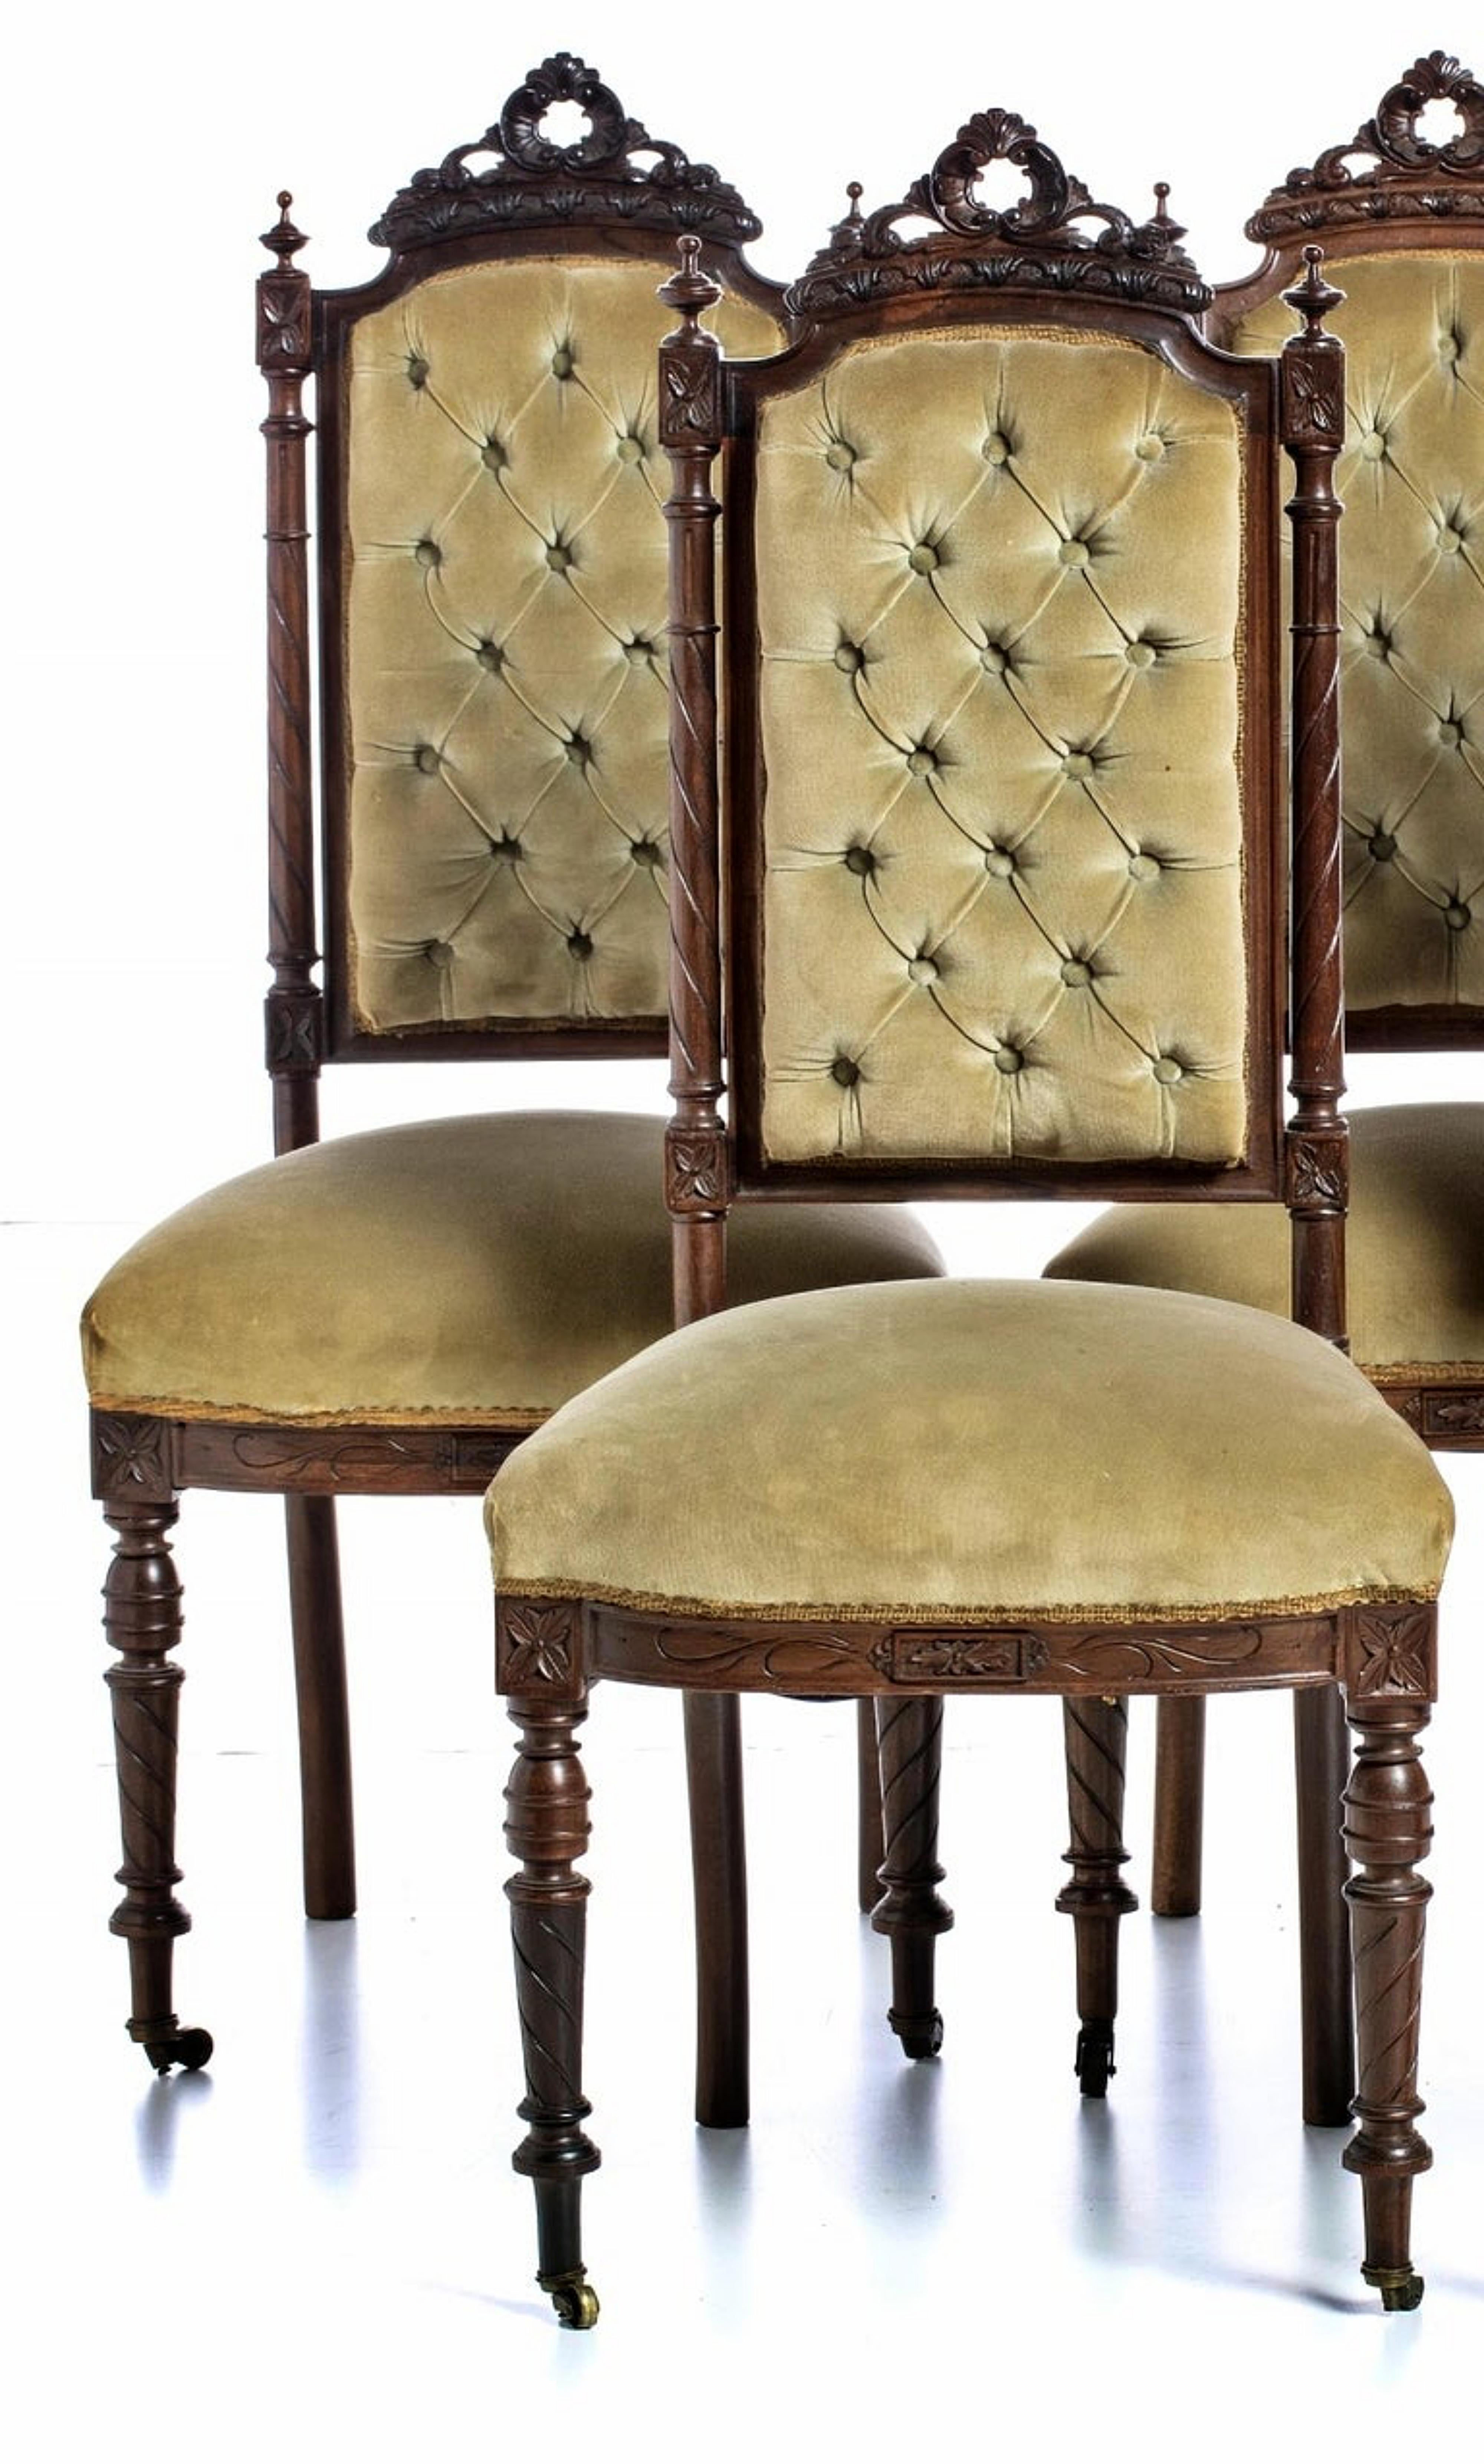 Five Romantic chairs
19th Century
in carved kingwood,
decorated with plant motifs.
Upholstered back and seats.
Signs of use.
Dim.: 103 x 49 x 39 cm.

THE PRICE IS FOR THE SET